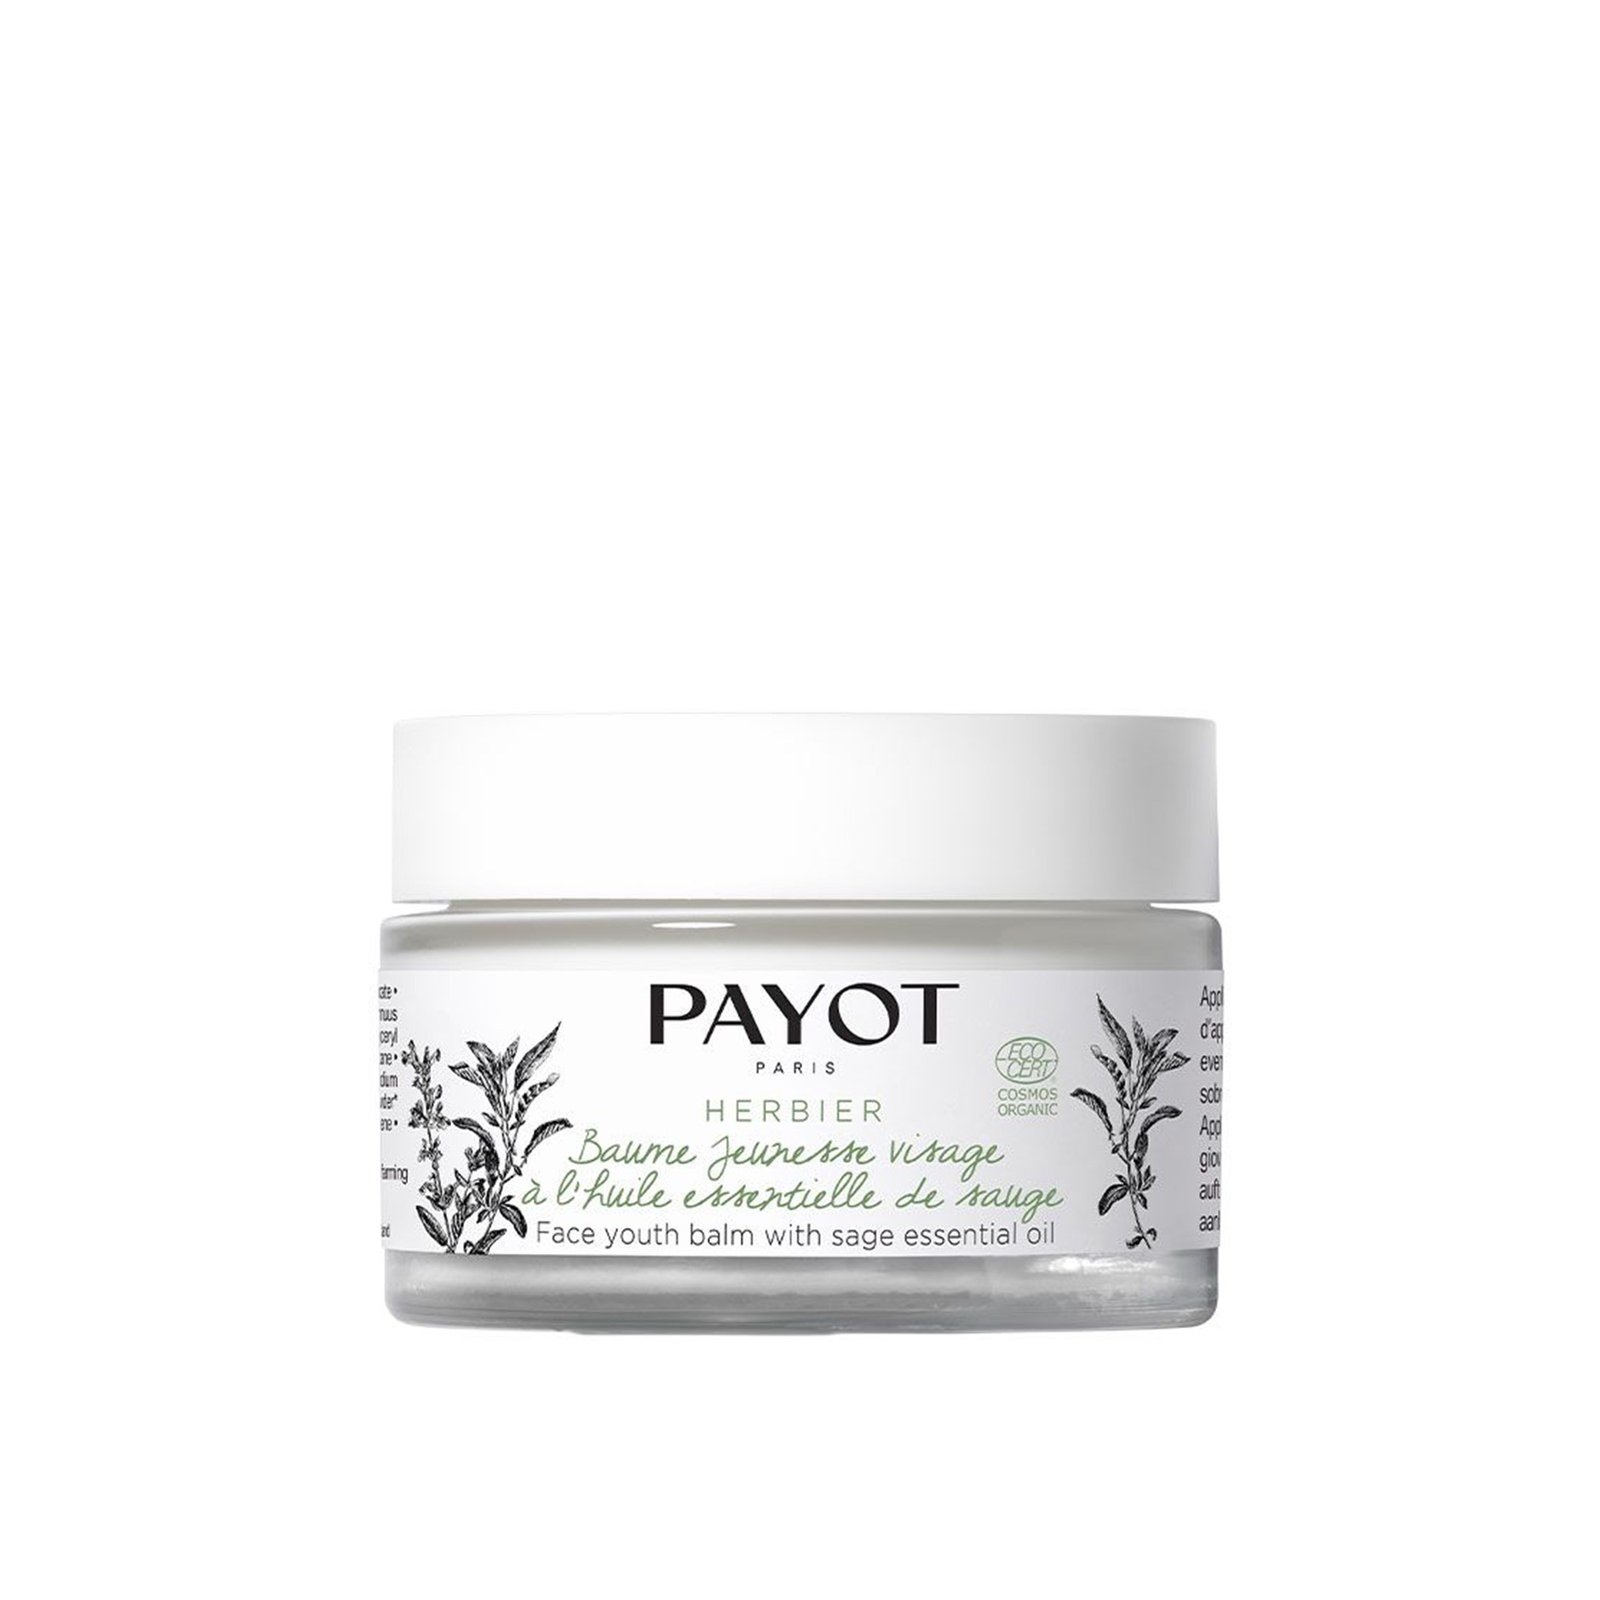 Payot Herbier Face Youth Balm With Sage Essential Oil 50ml